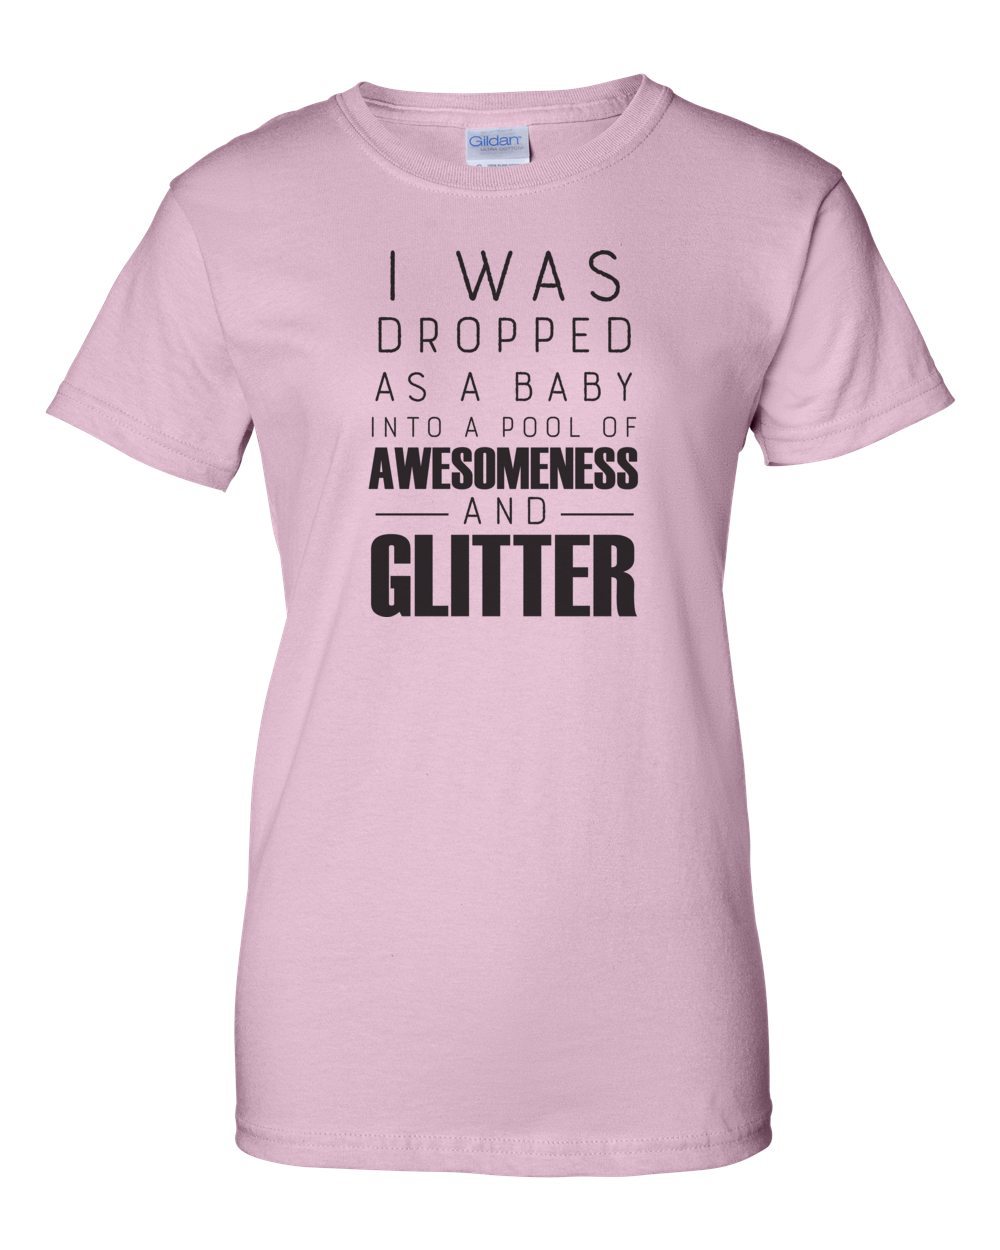 Comical Shirt Ladies I was Dropped As A Baby in Glitter & Awesomeness Rocker